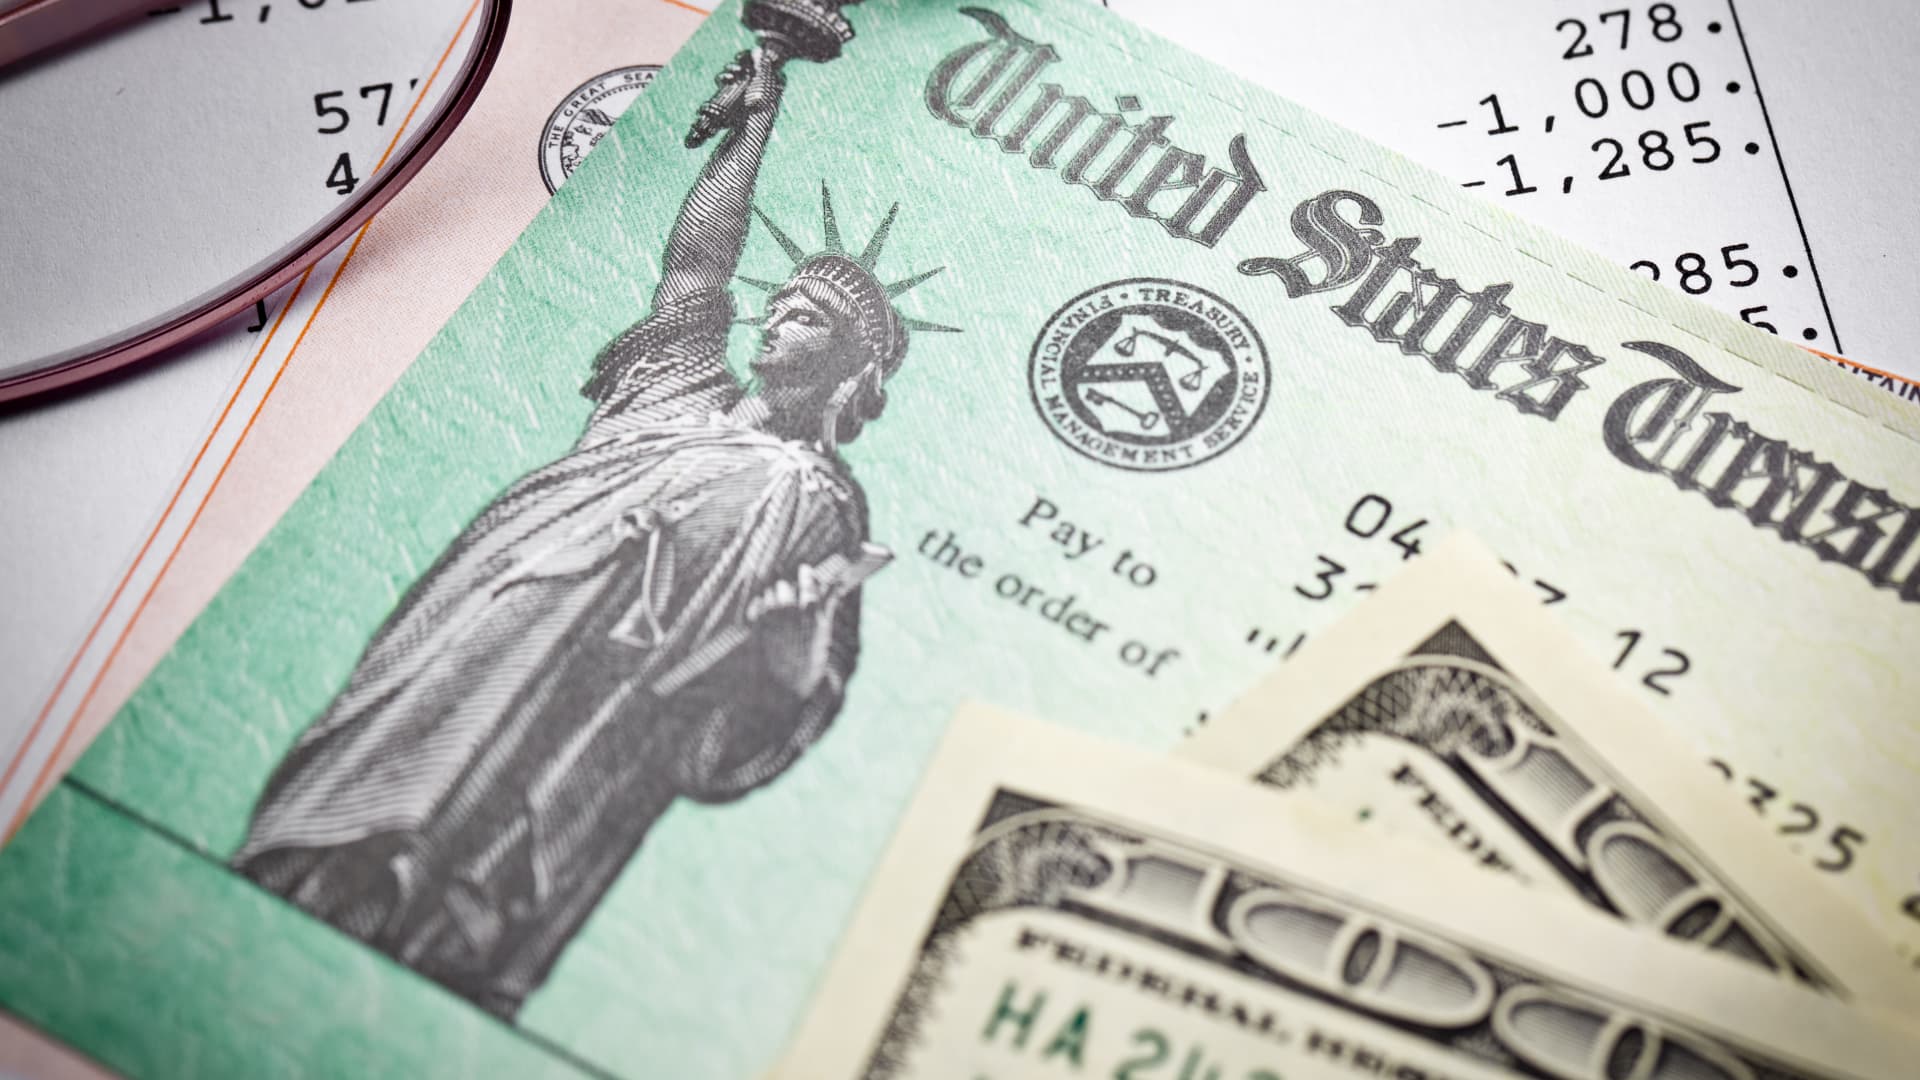 If you're still missing your tax refund, you'll soon receive 7% interest from the IRS — but it's taxable